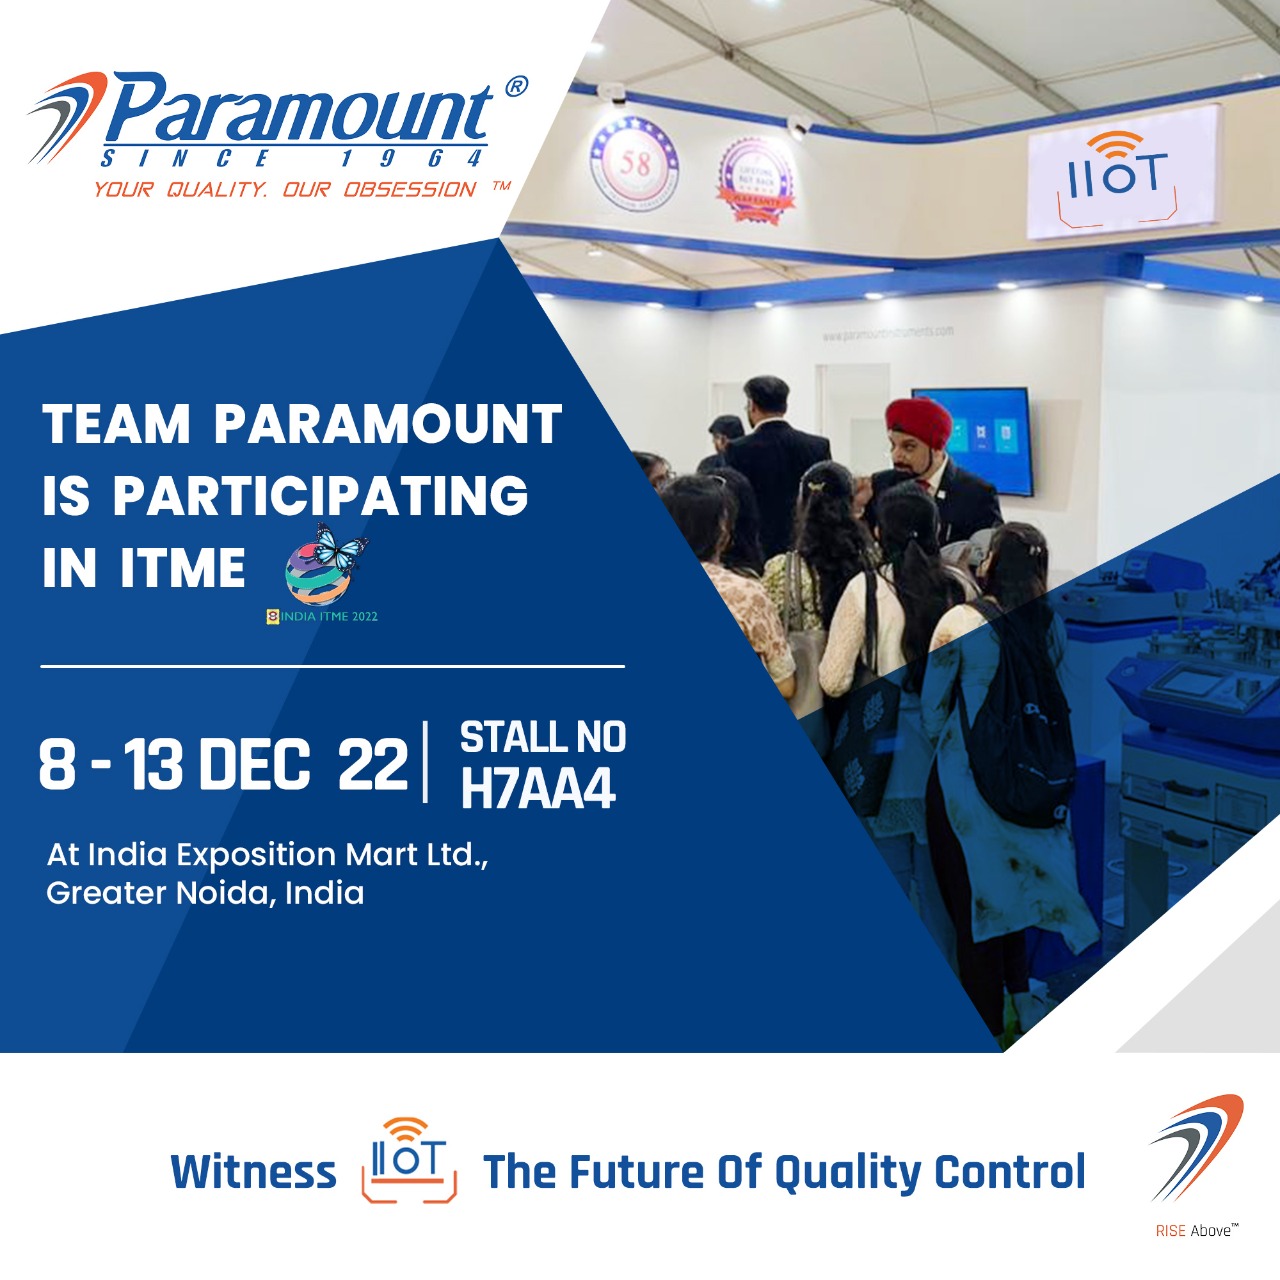 TEAM PARAMOUNT
IS PARTICIPATING

LTV LT 3

REE Hp Try

At India Exposition Mart Ltd.,
Greater Noida, India

witness (197; The Future Of Quality Control